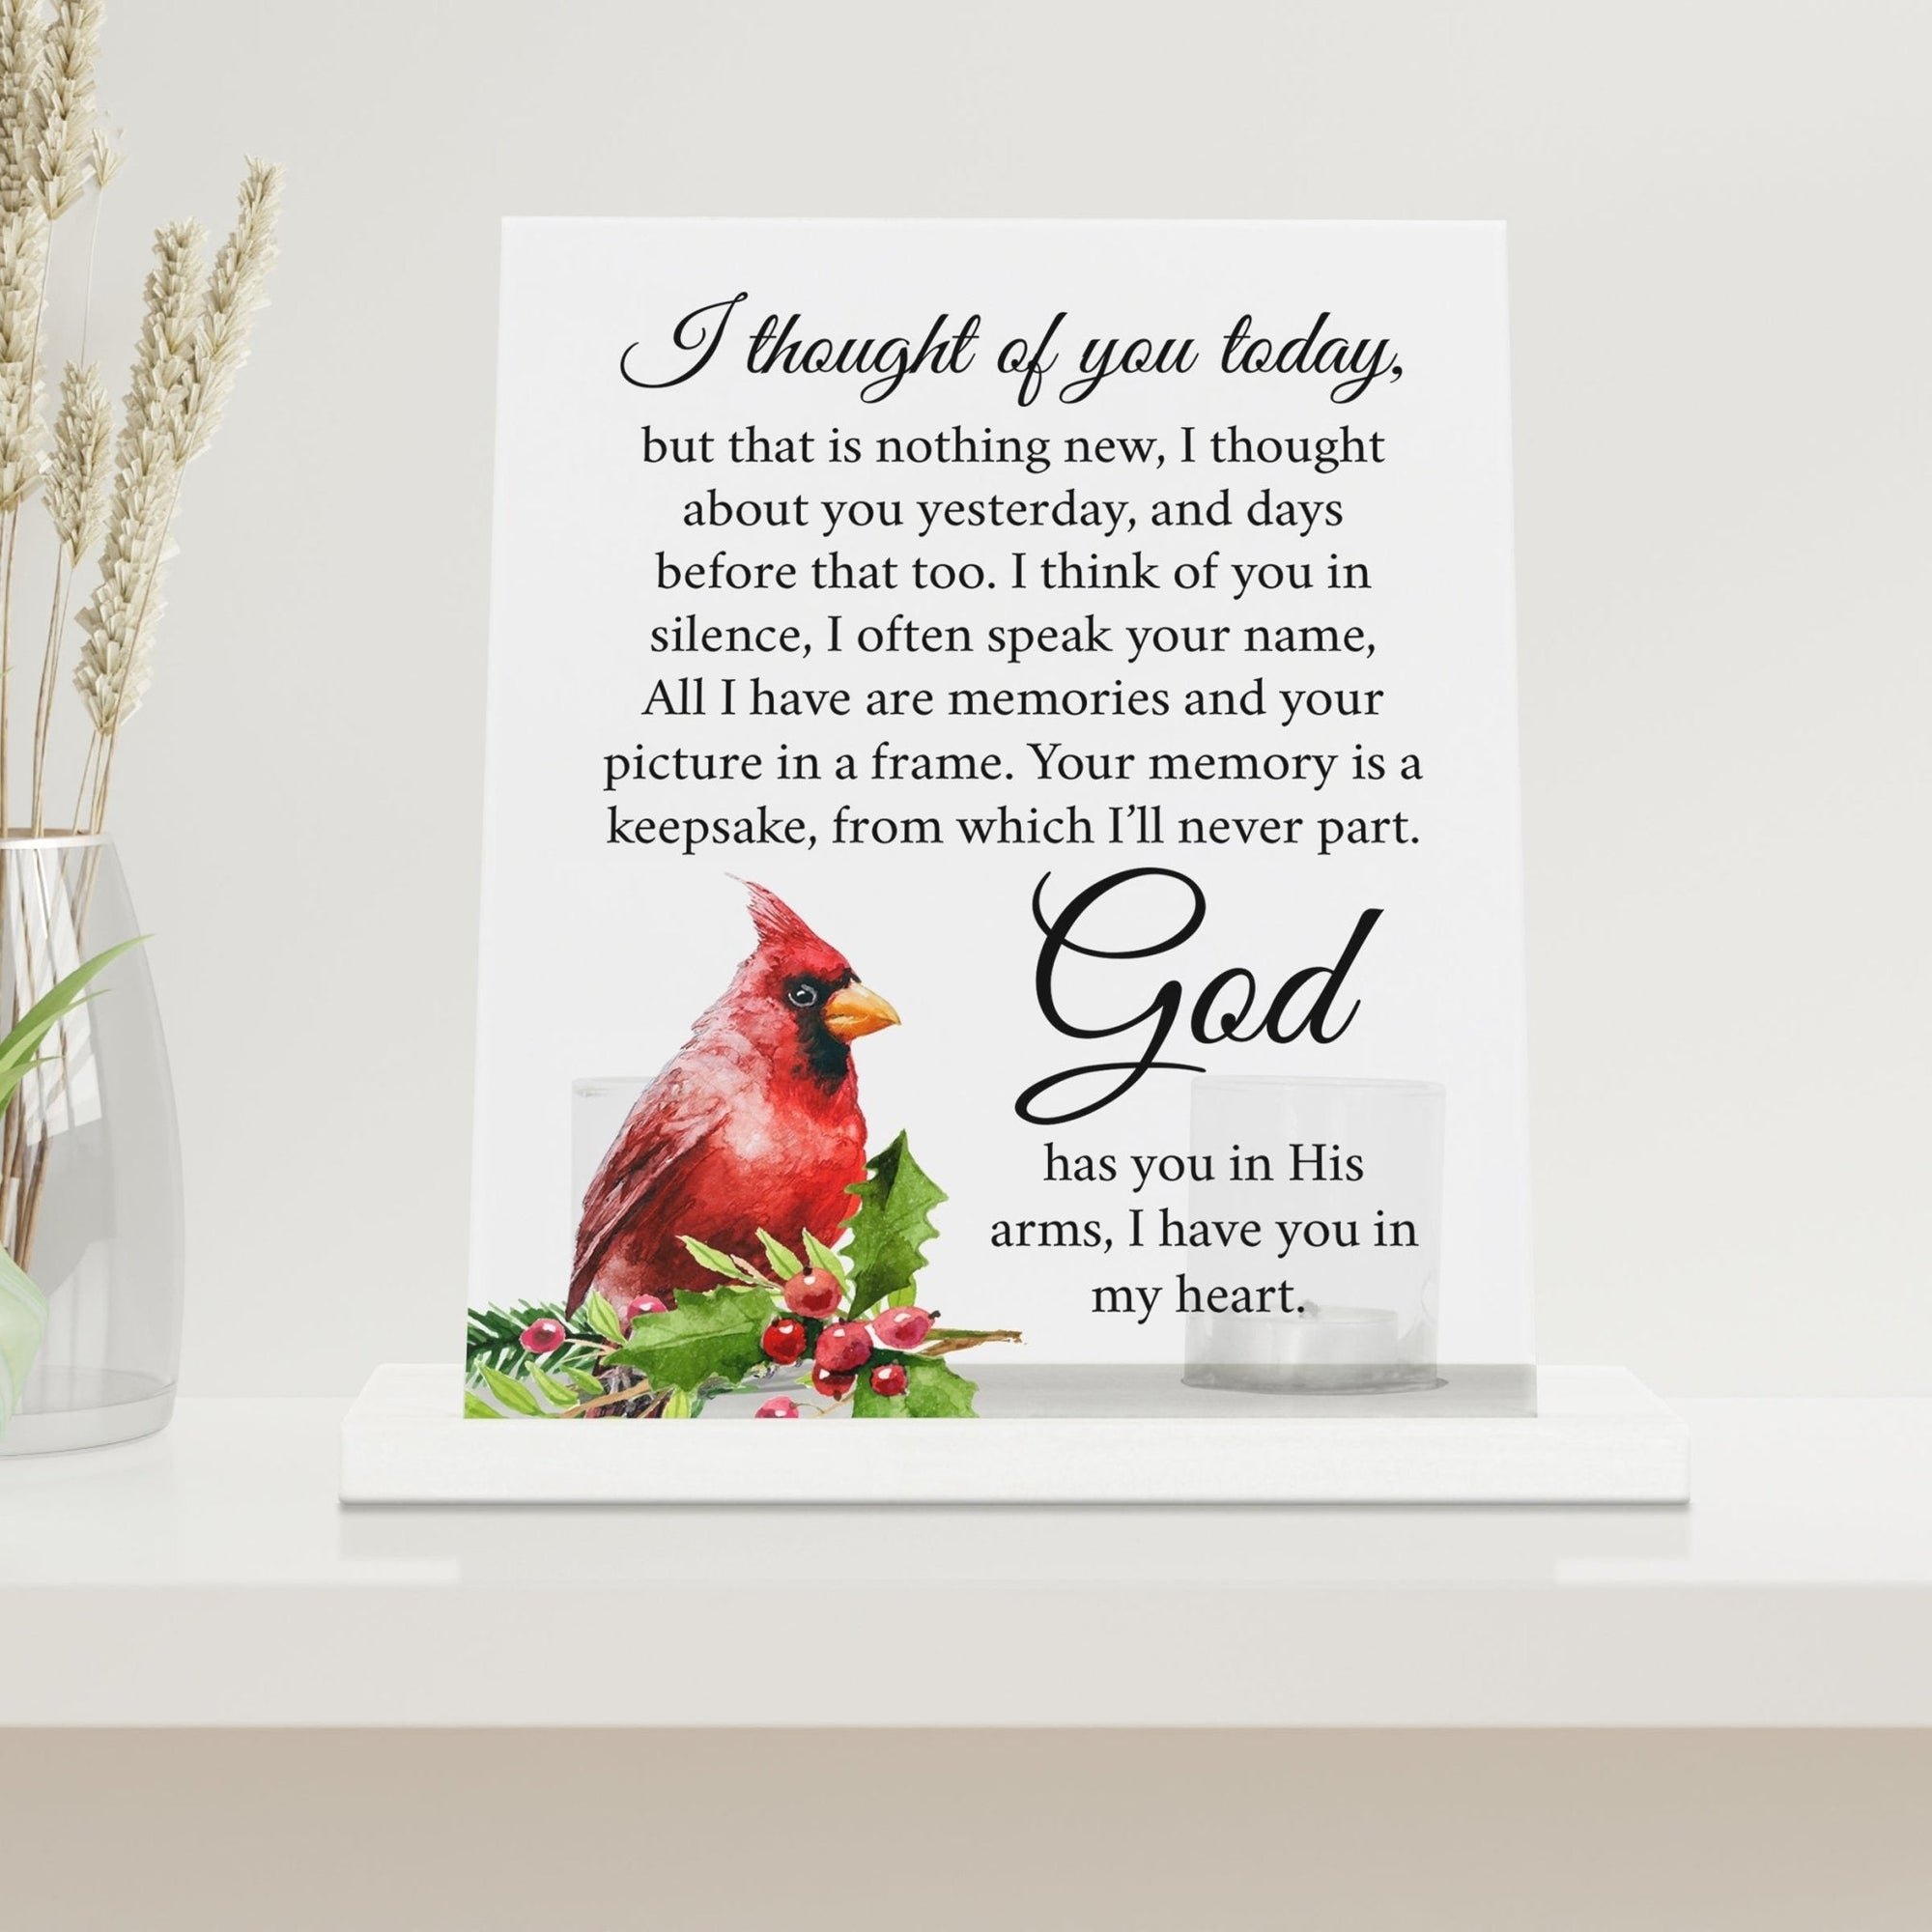 A beautifully crafted candle holder for votive candles, designed as a memorial gift. The Lifesong Milestones Cardinal Memorial Frosted Acrylic Sign with Base stands at the center, radiating comfort and remembrance.